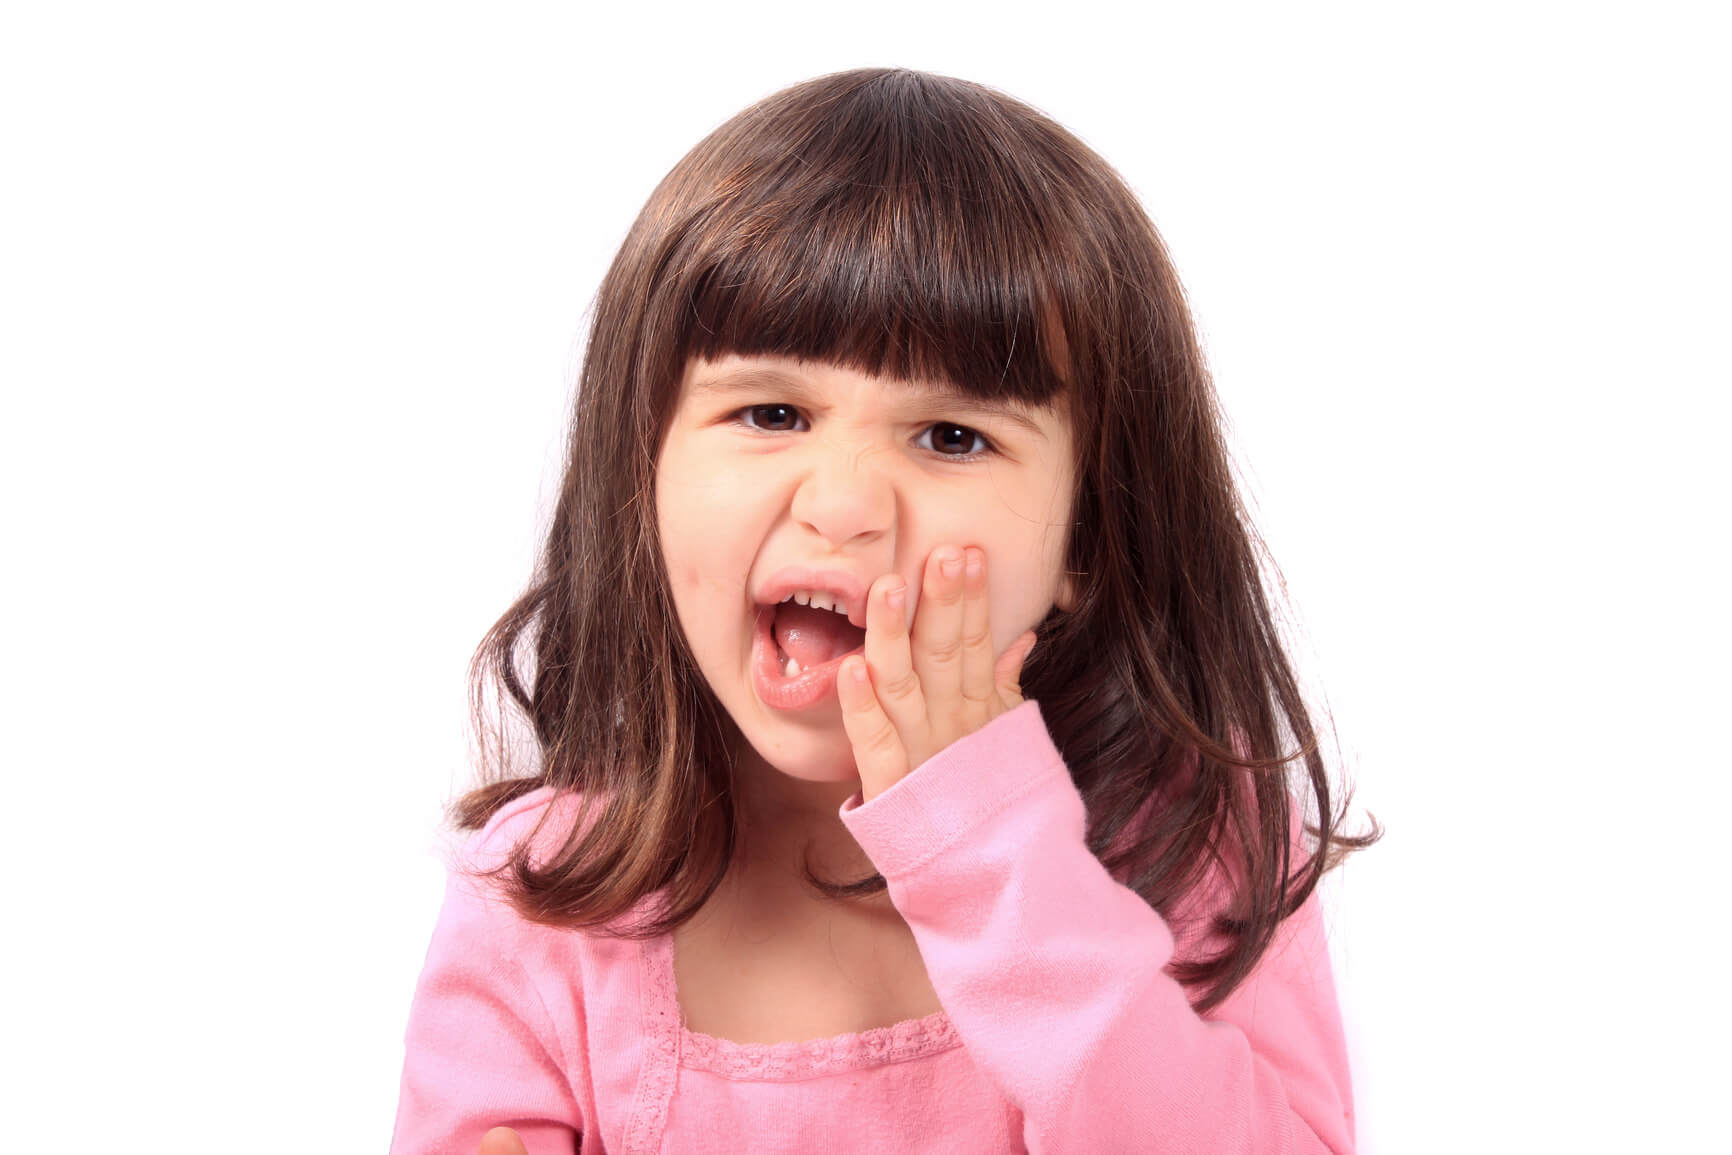 https://southdaviskids.com/wp-content/uploads/2018/01/what-to-do-if-your-child-has-a-toothache.jpg